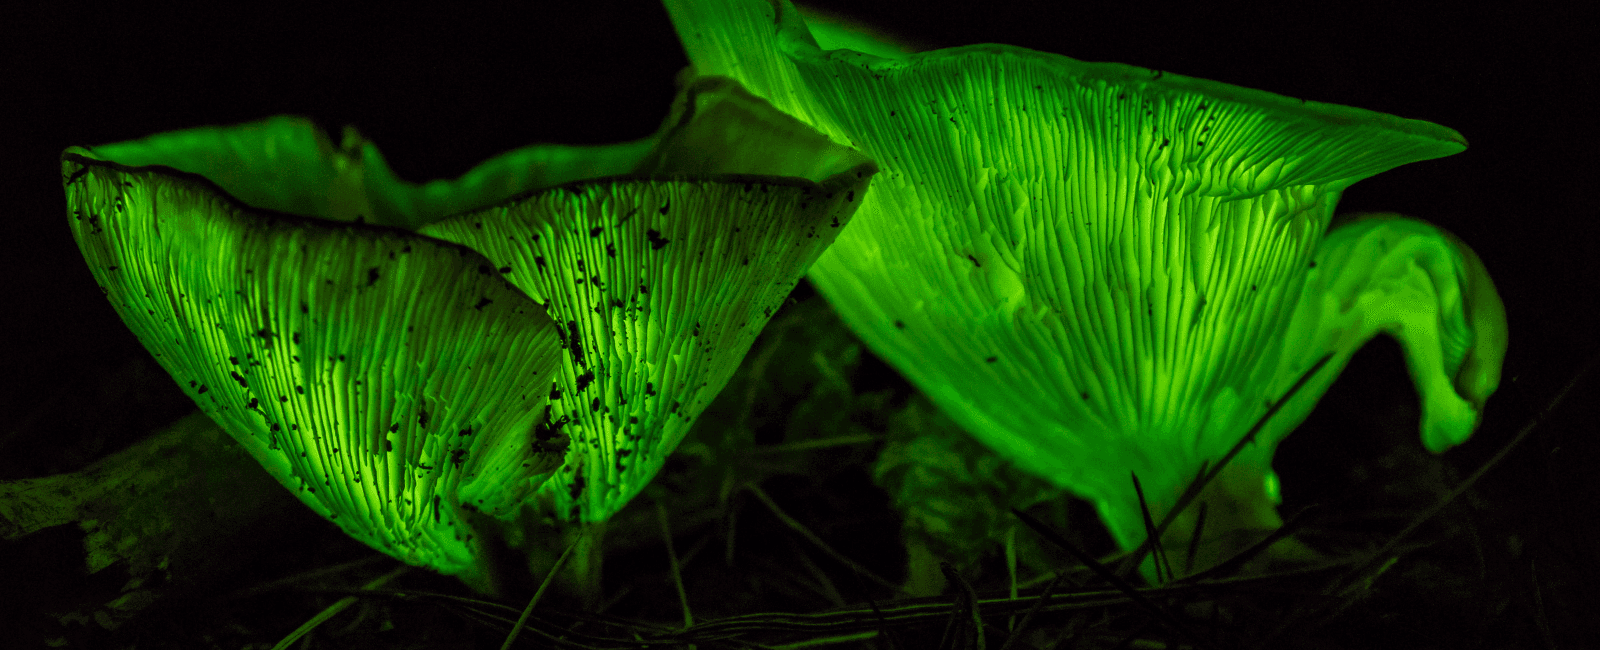 A Guide to the World's Most Beautiful Bioluminescent Mushrooms